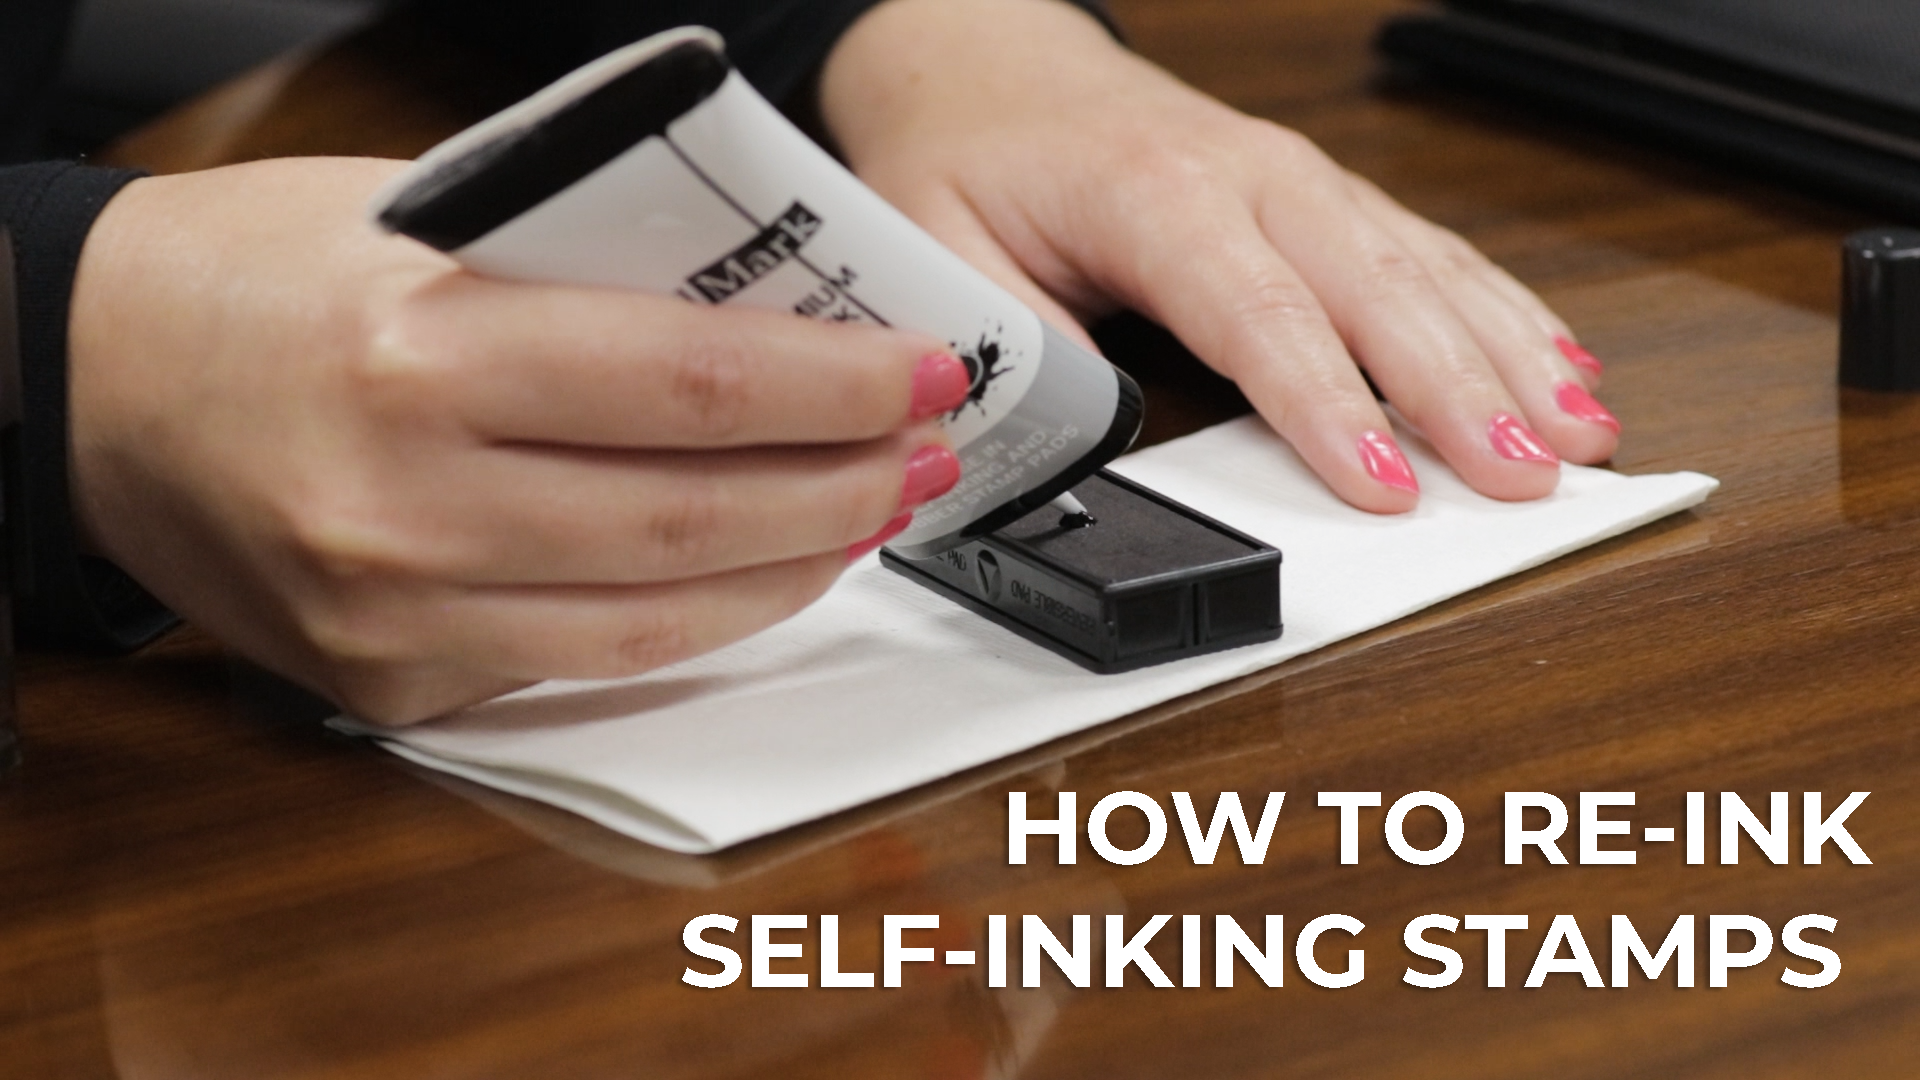 ExcelMark A-1539 Self-Inking Stamp –